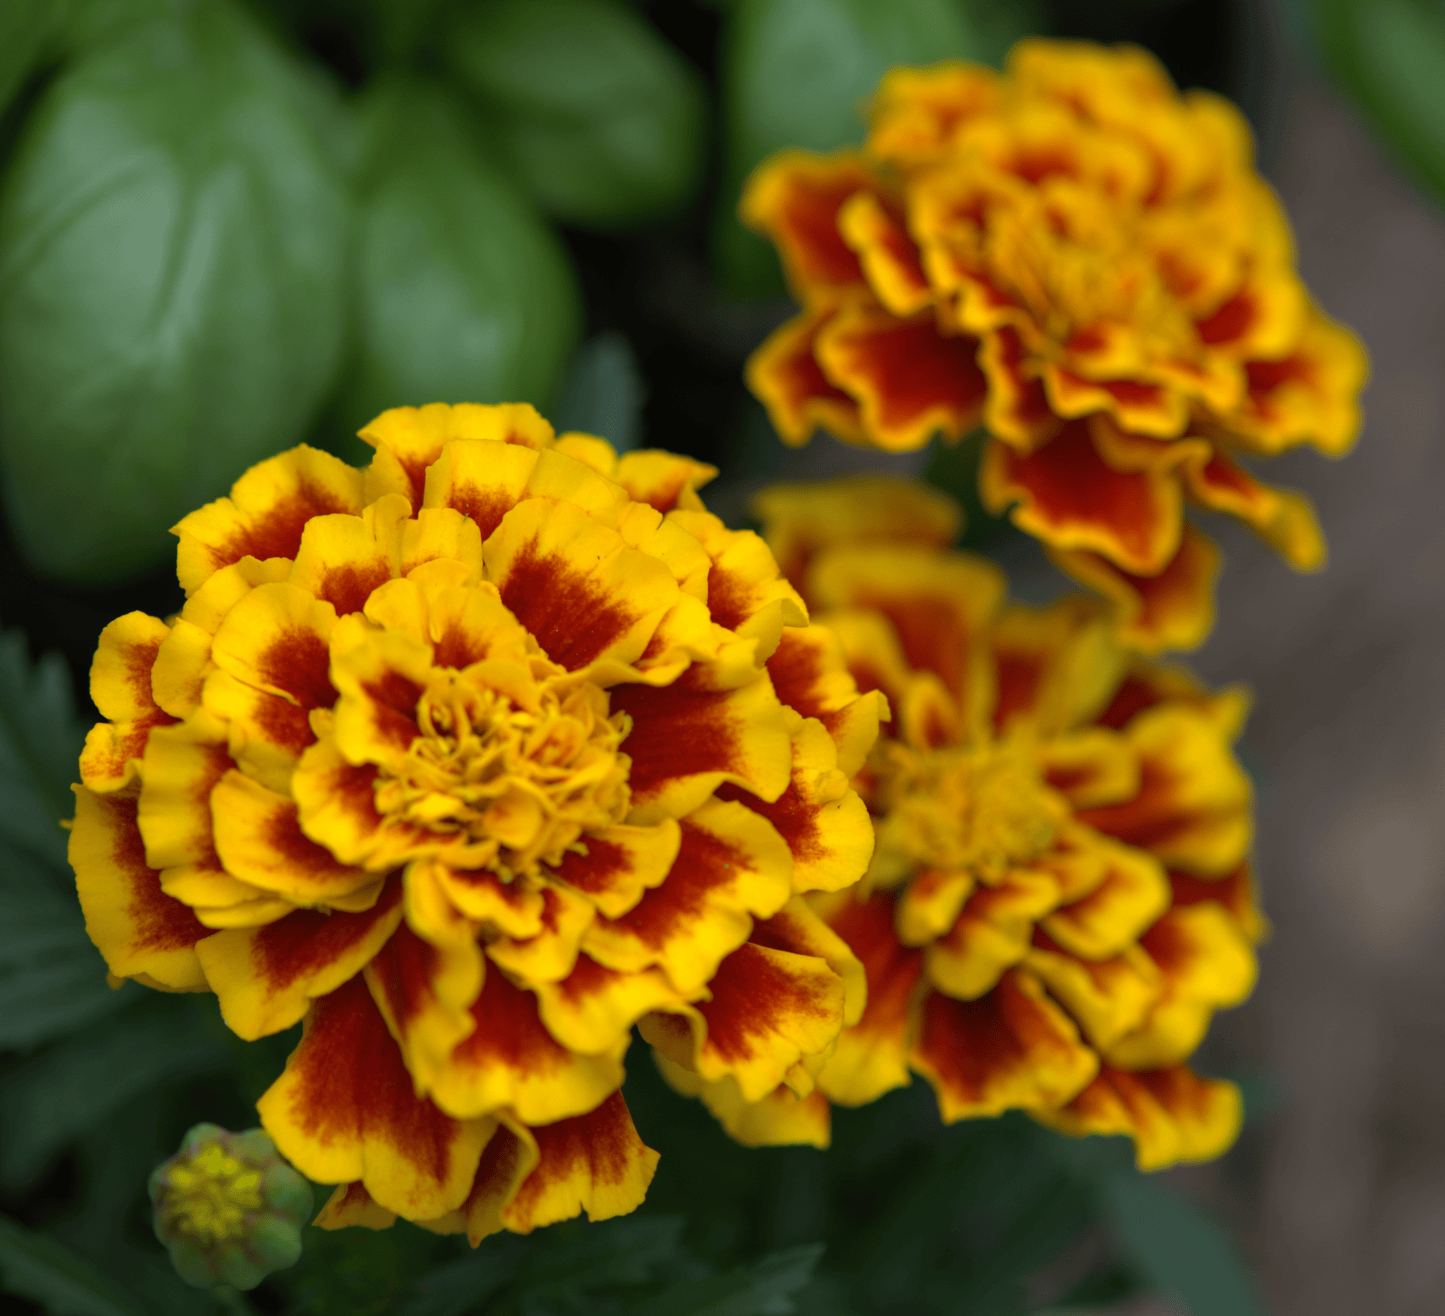 Lovely close up yellow and orange flower of the Tagetes patula 'French Marigold' 